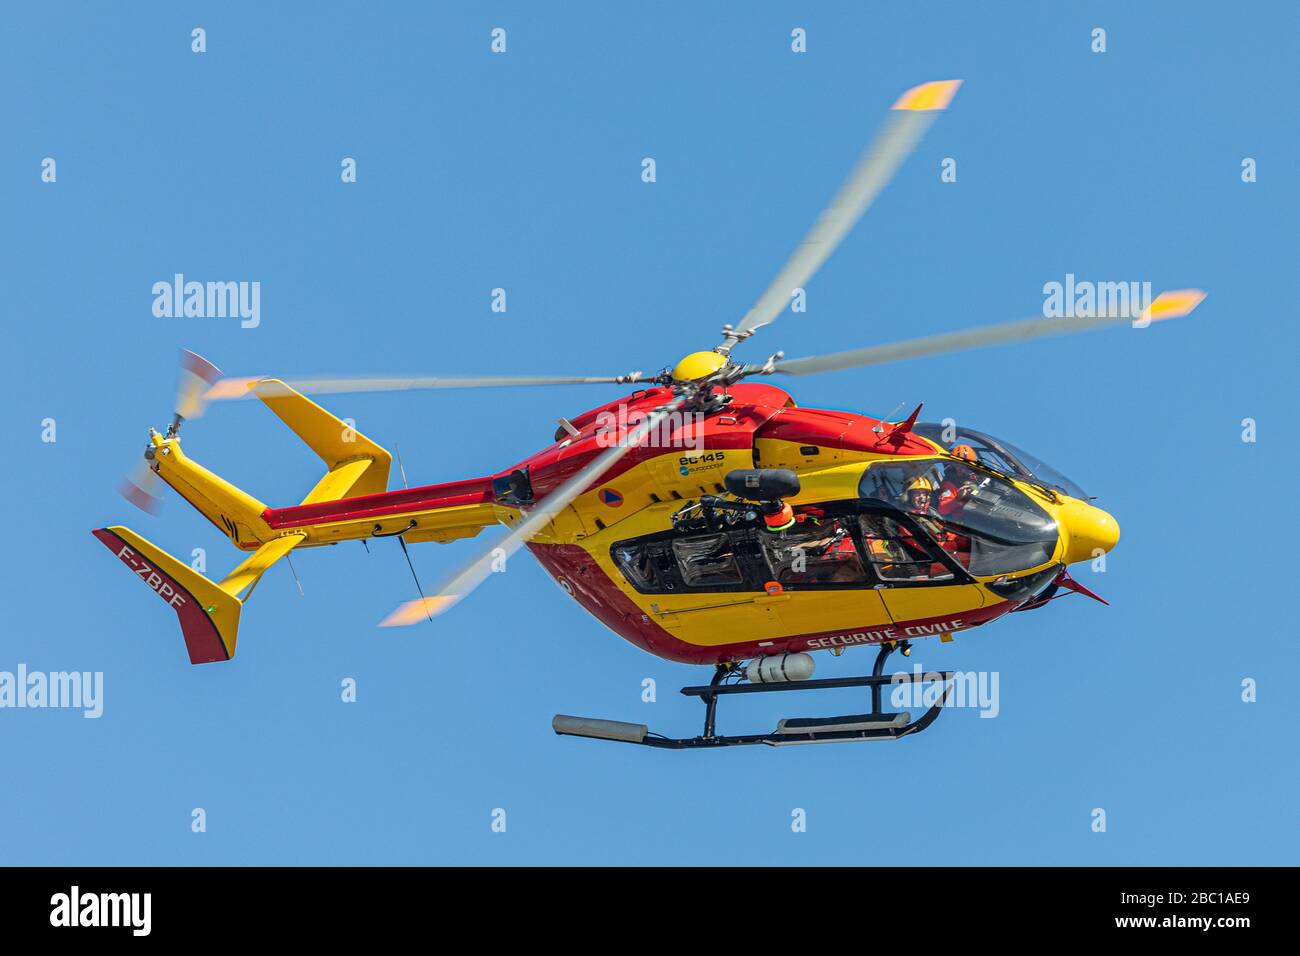 CIVIL EMERGENCY SERVICES' HELICOPTER IN FLIGHT, VANNES, FRANCE Stock Photo